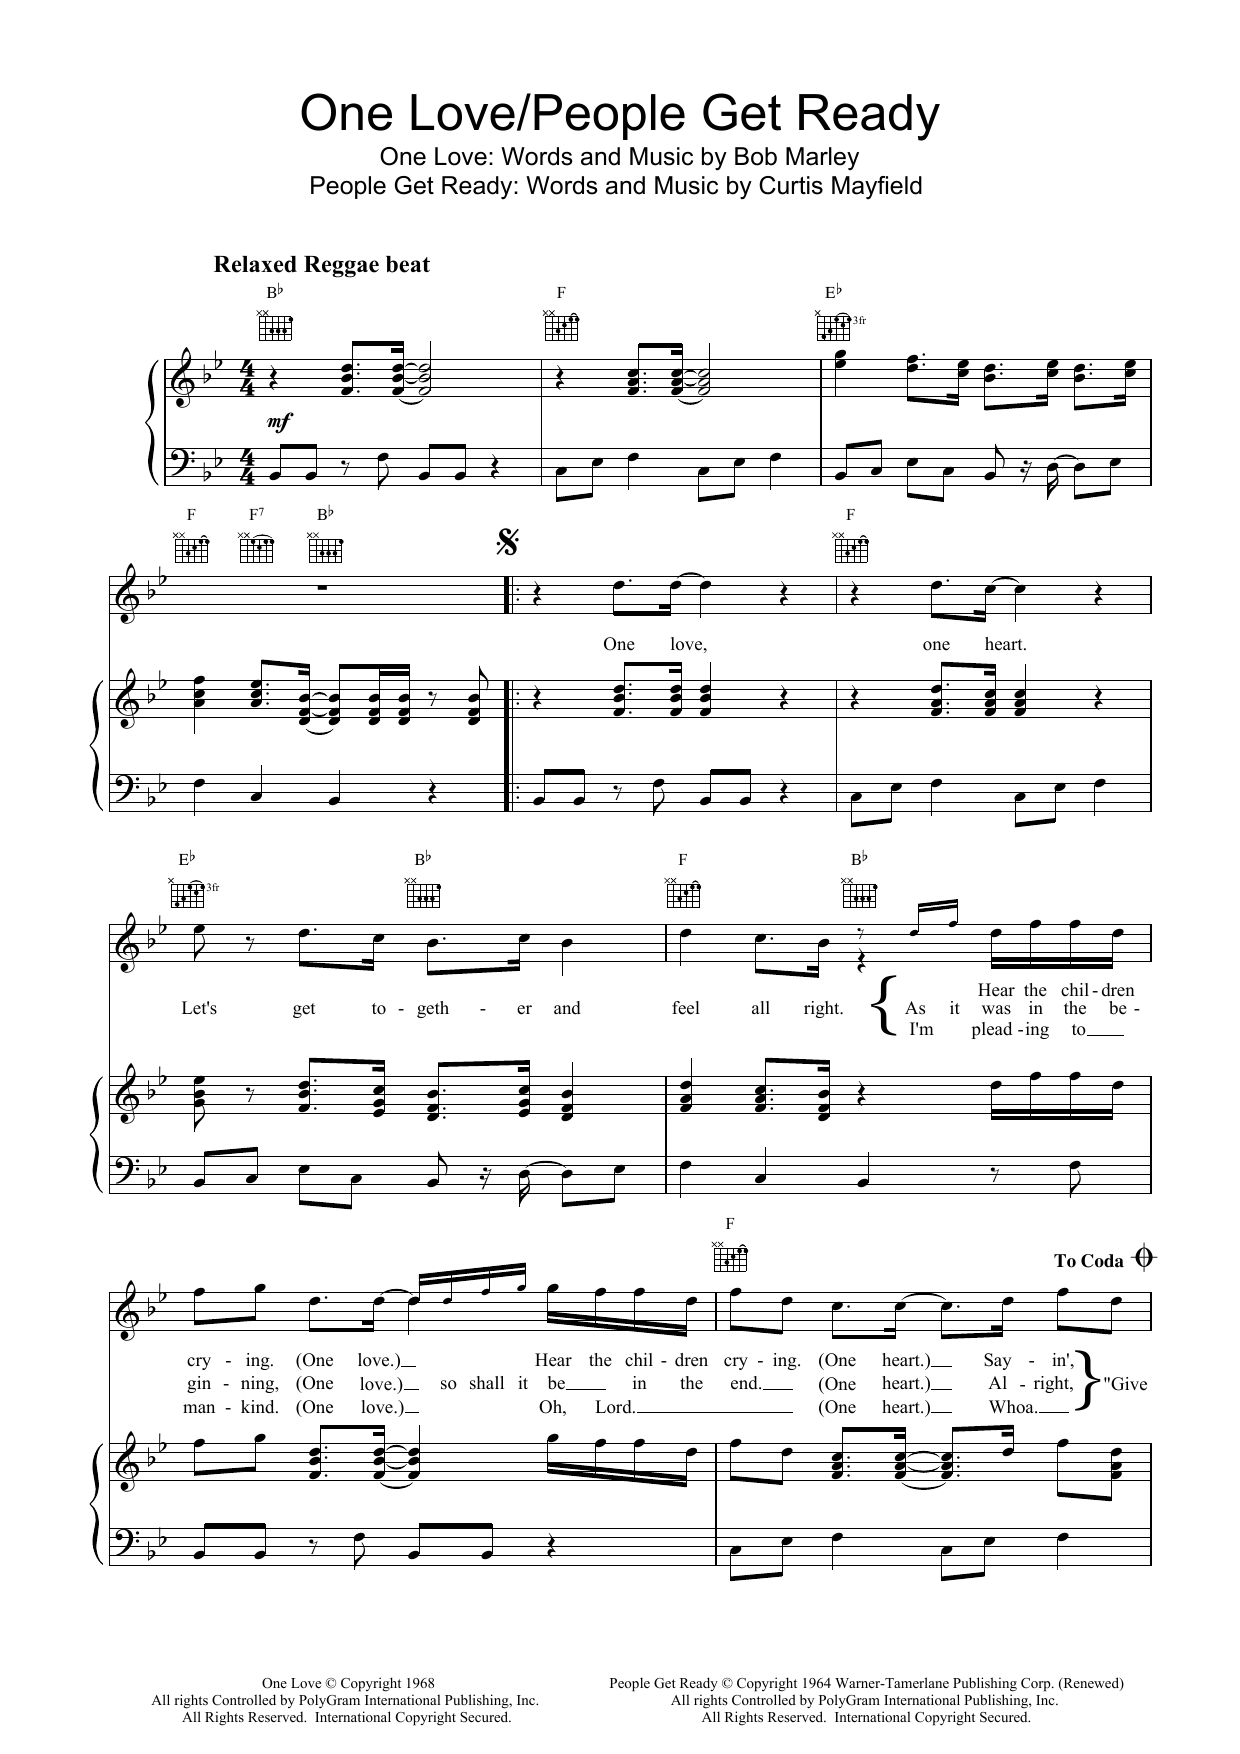 Download Bob Marley One Love/People Get Ready Sheet Music